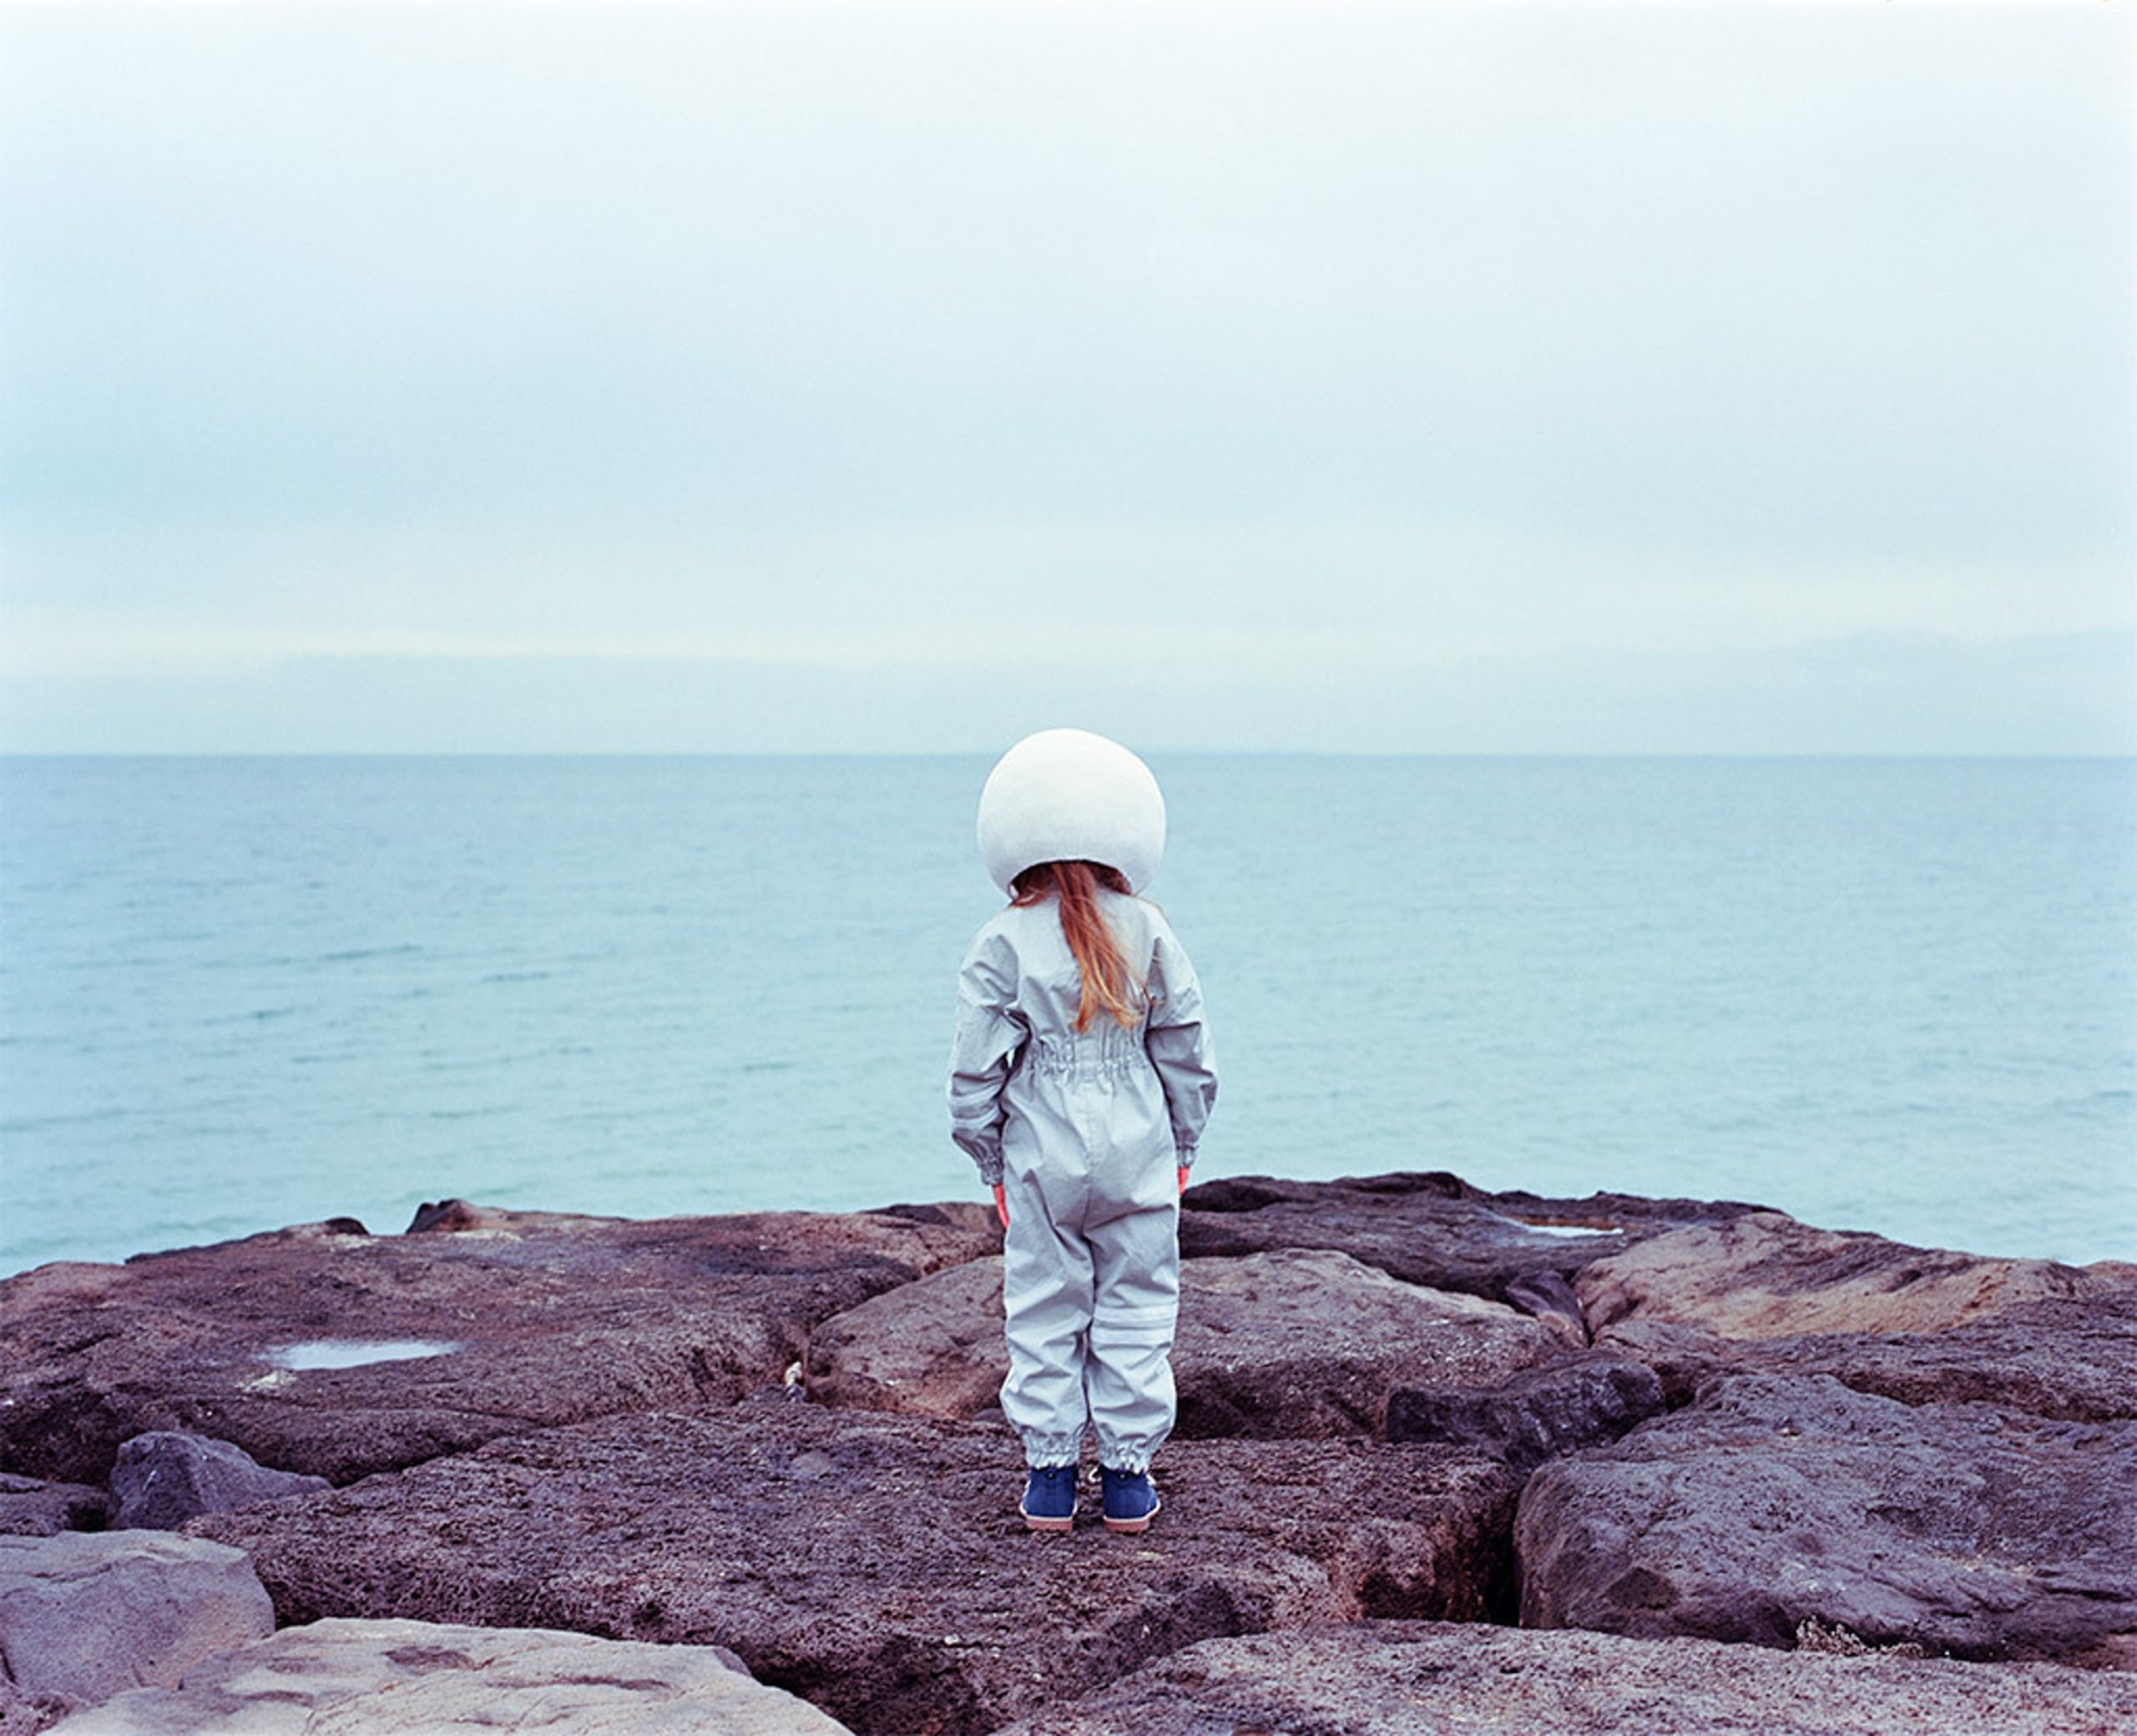 Rocky Shores by Andrew Rovenko - a girl is turned towards the see with her back to the camera in an astronaut suit.